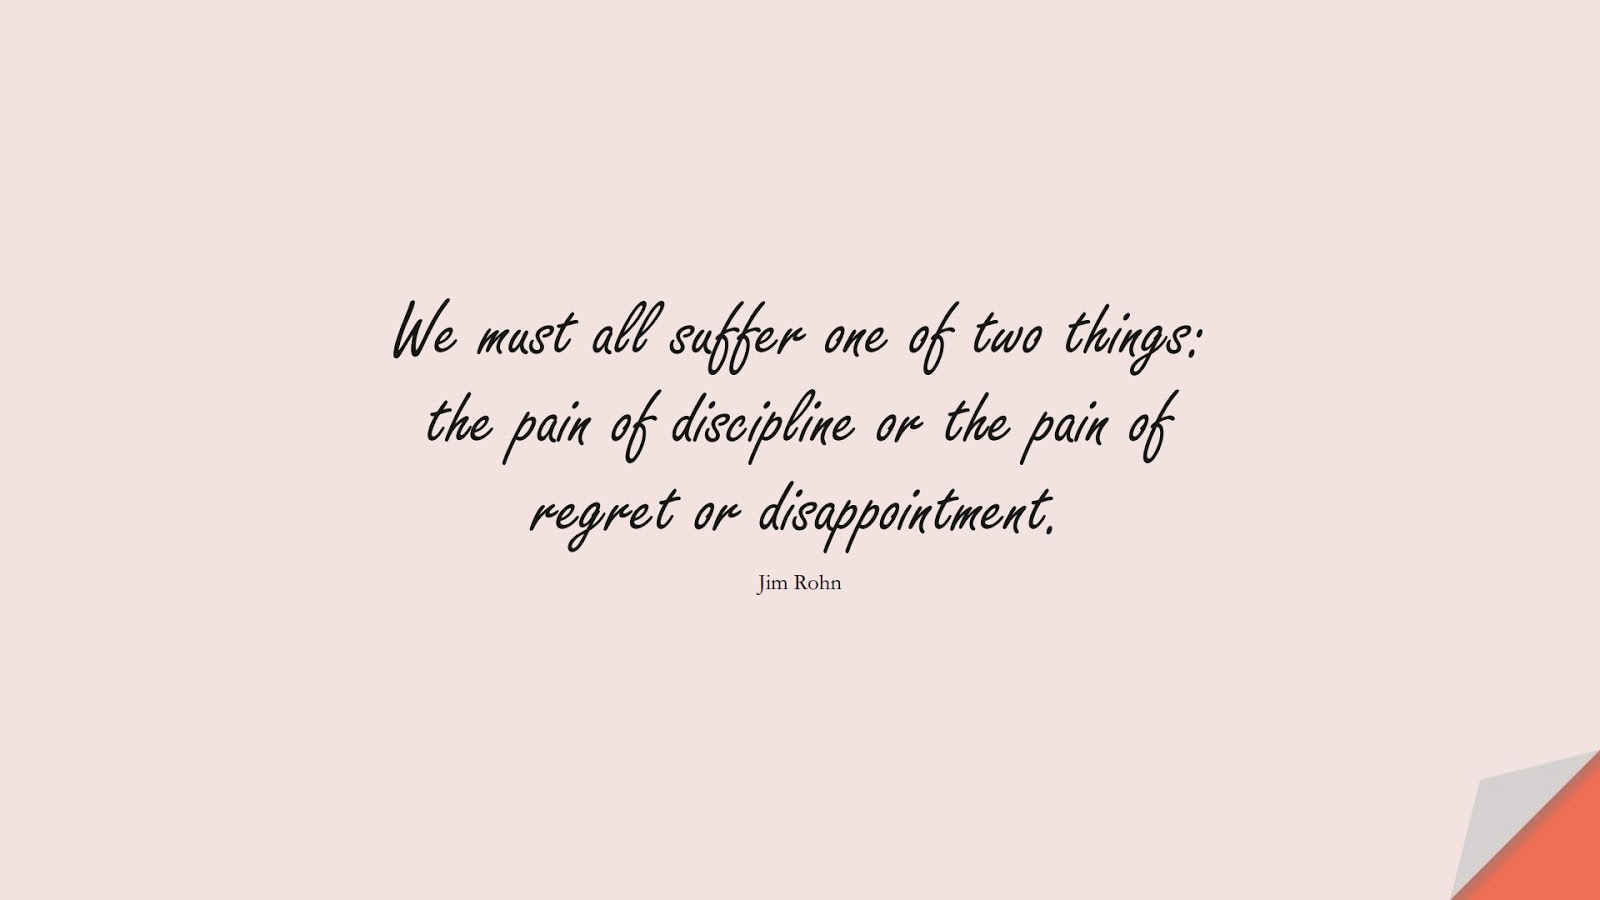 We must all suffer one of two things: the pain of discipline or the pain of regret or disappointment. (Jim Rohn);  #MotivationalQuotes